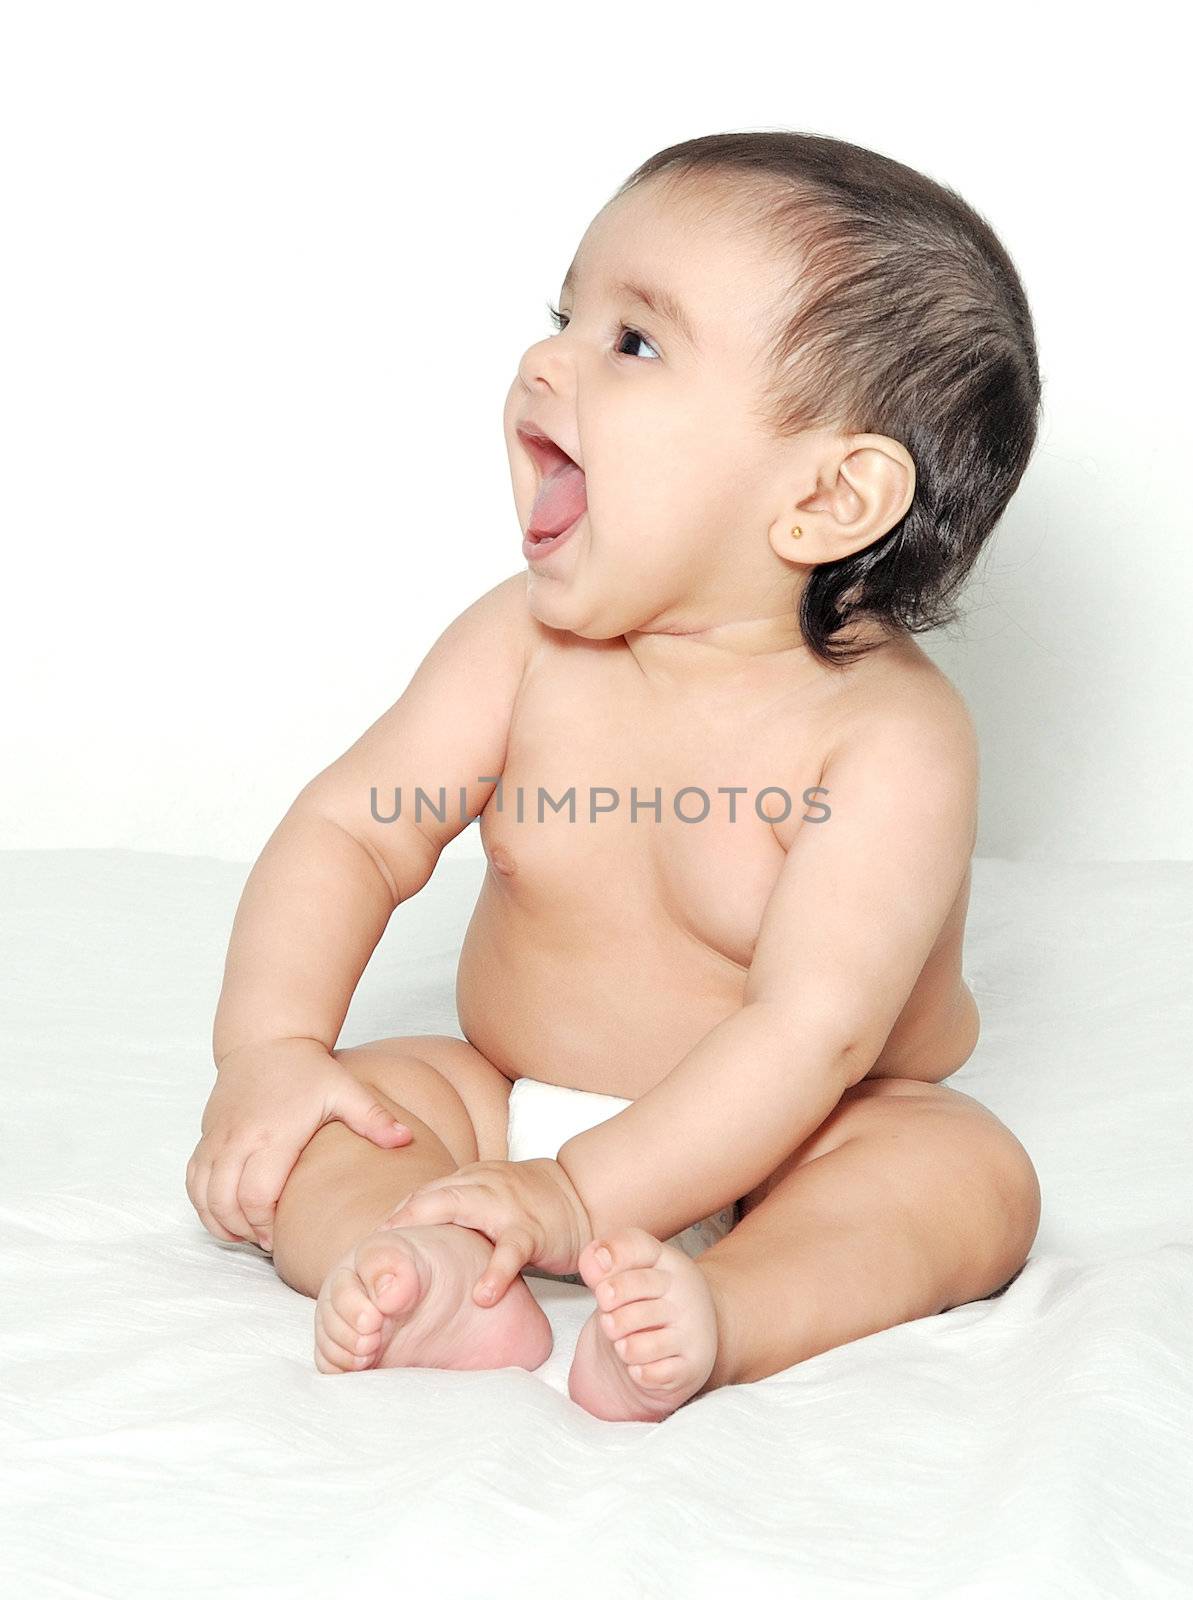  The baby of six months on a light background